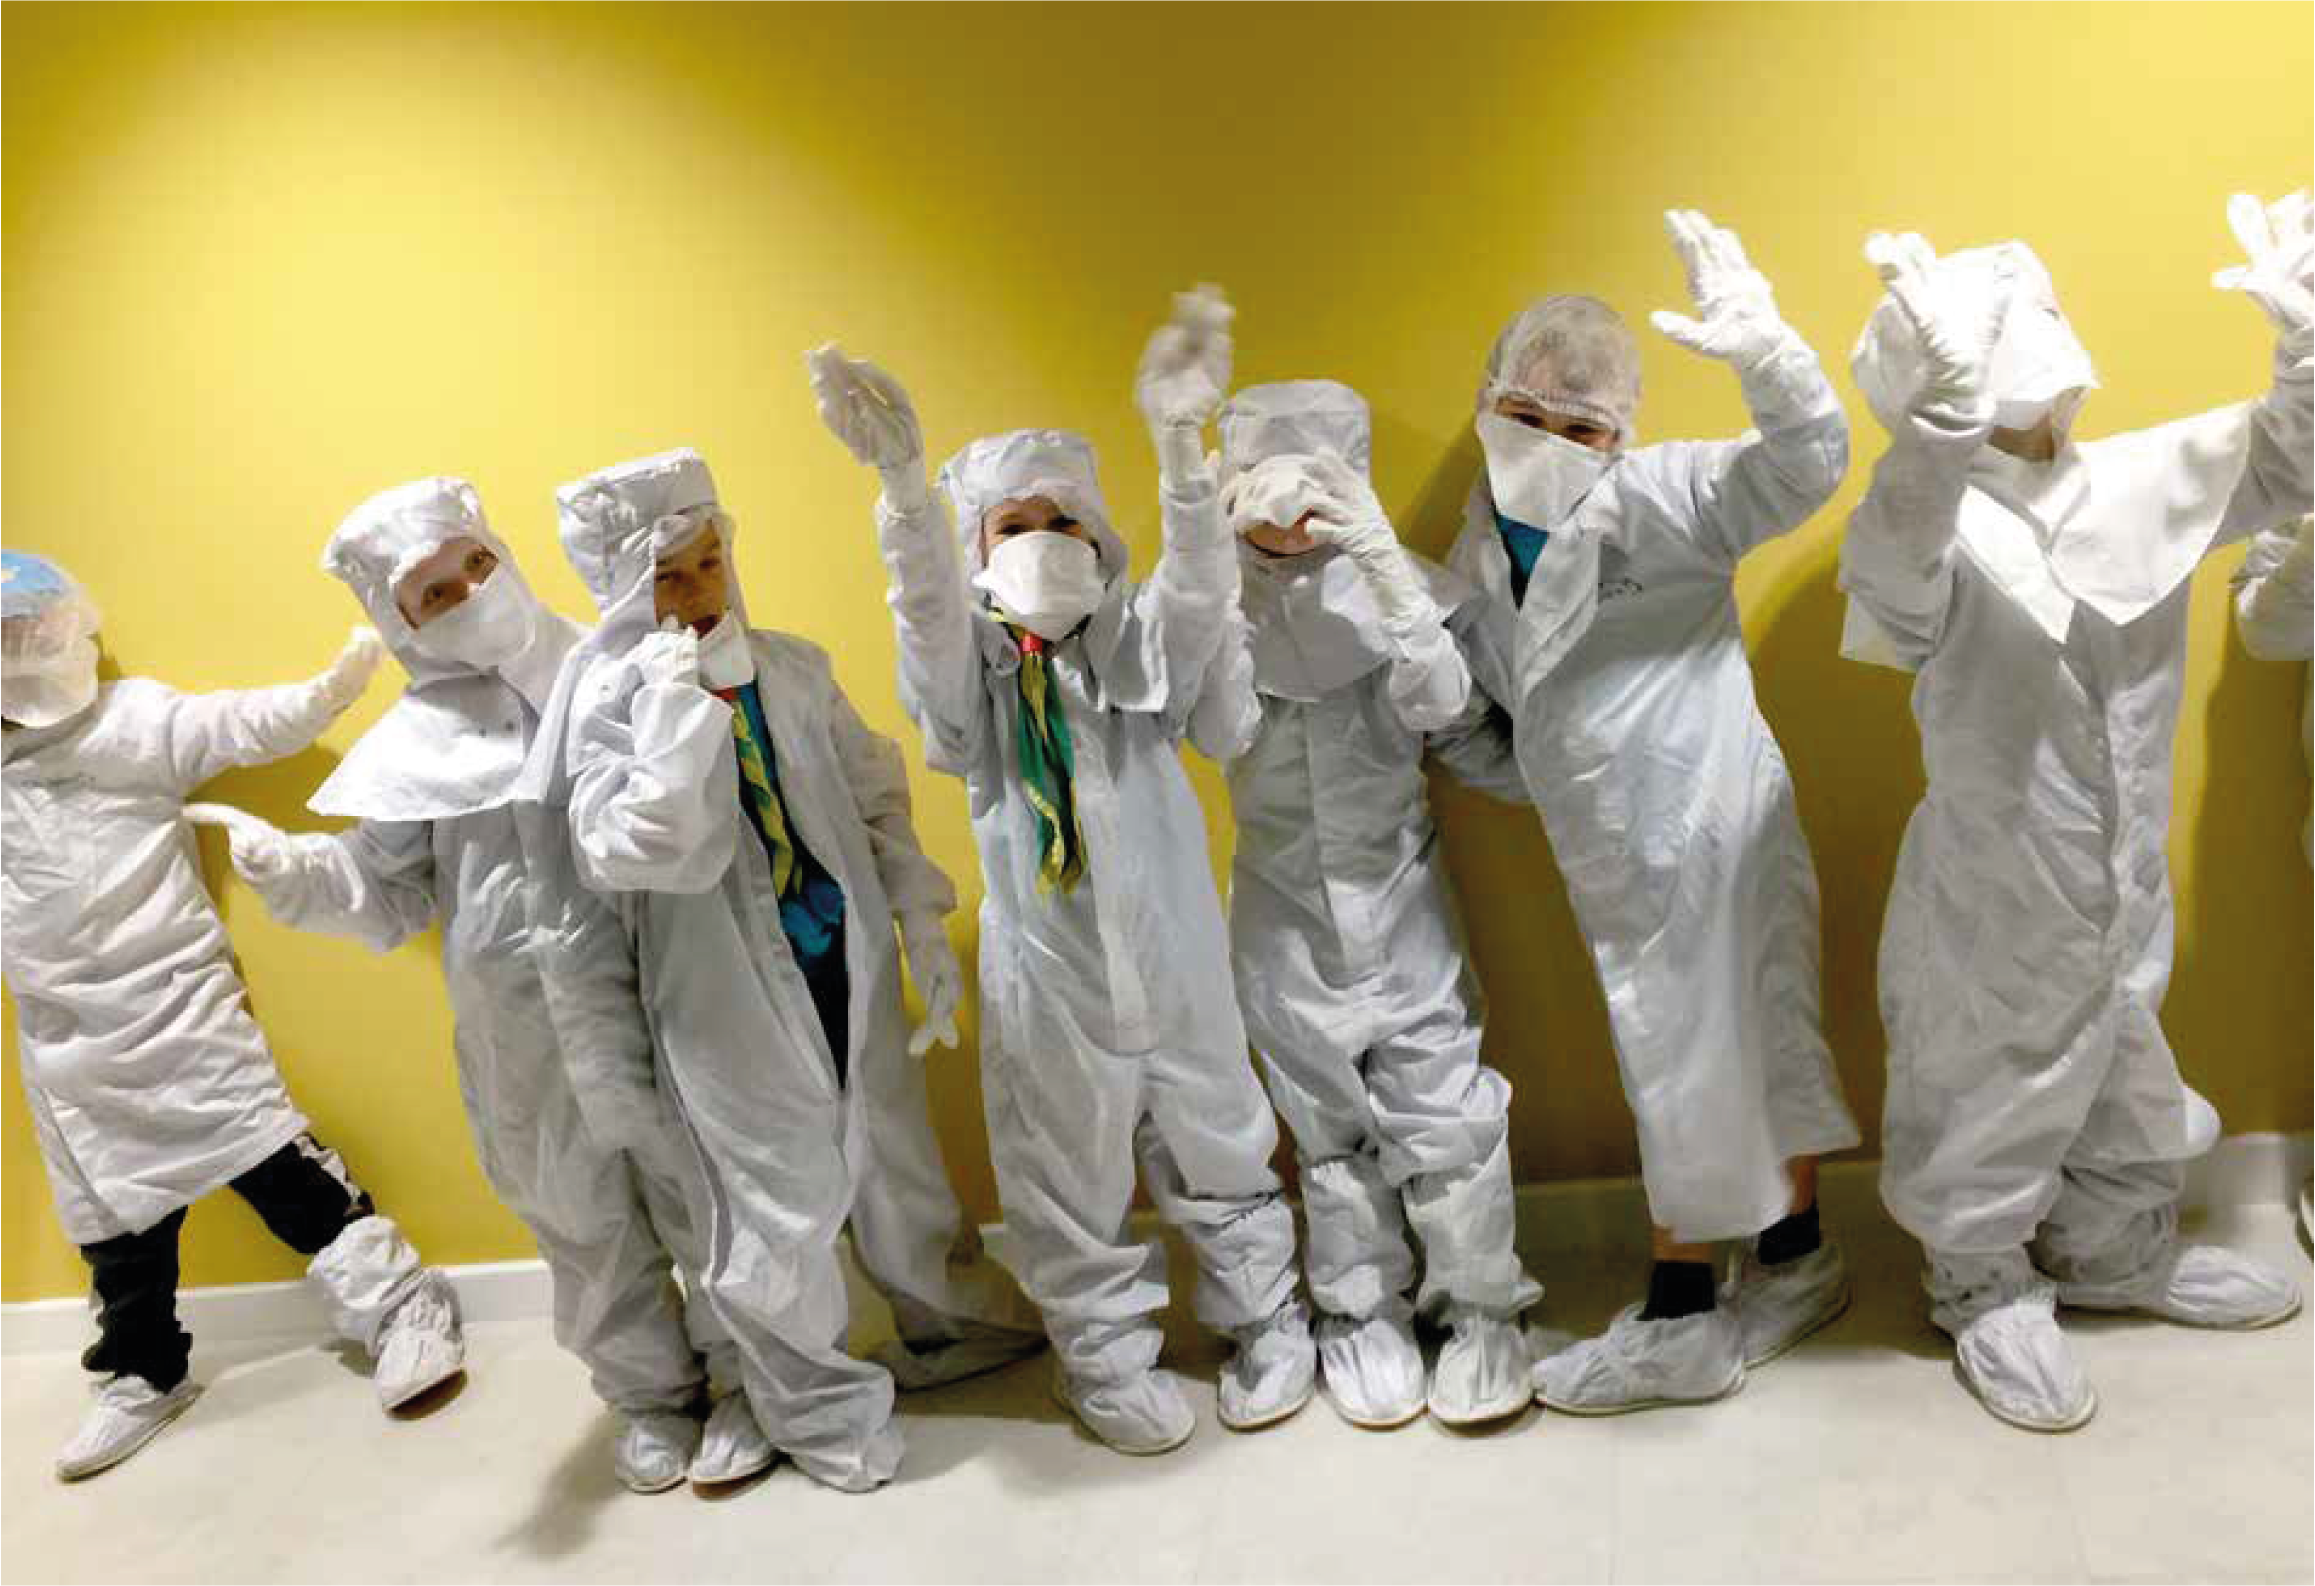 Beavers dressing up in clean room suits